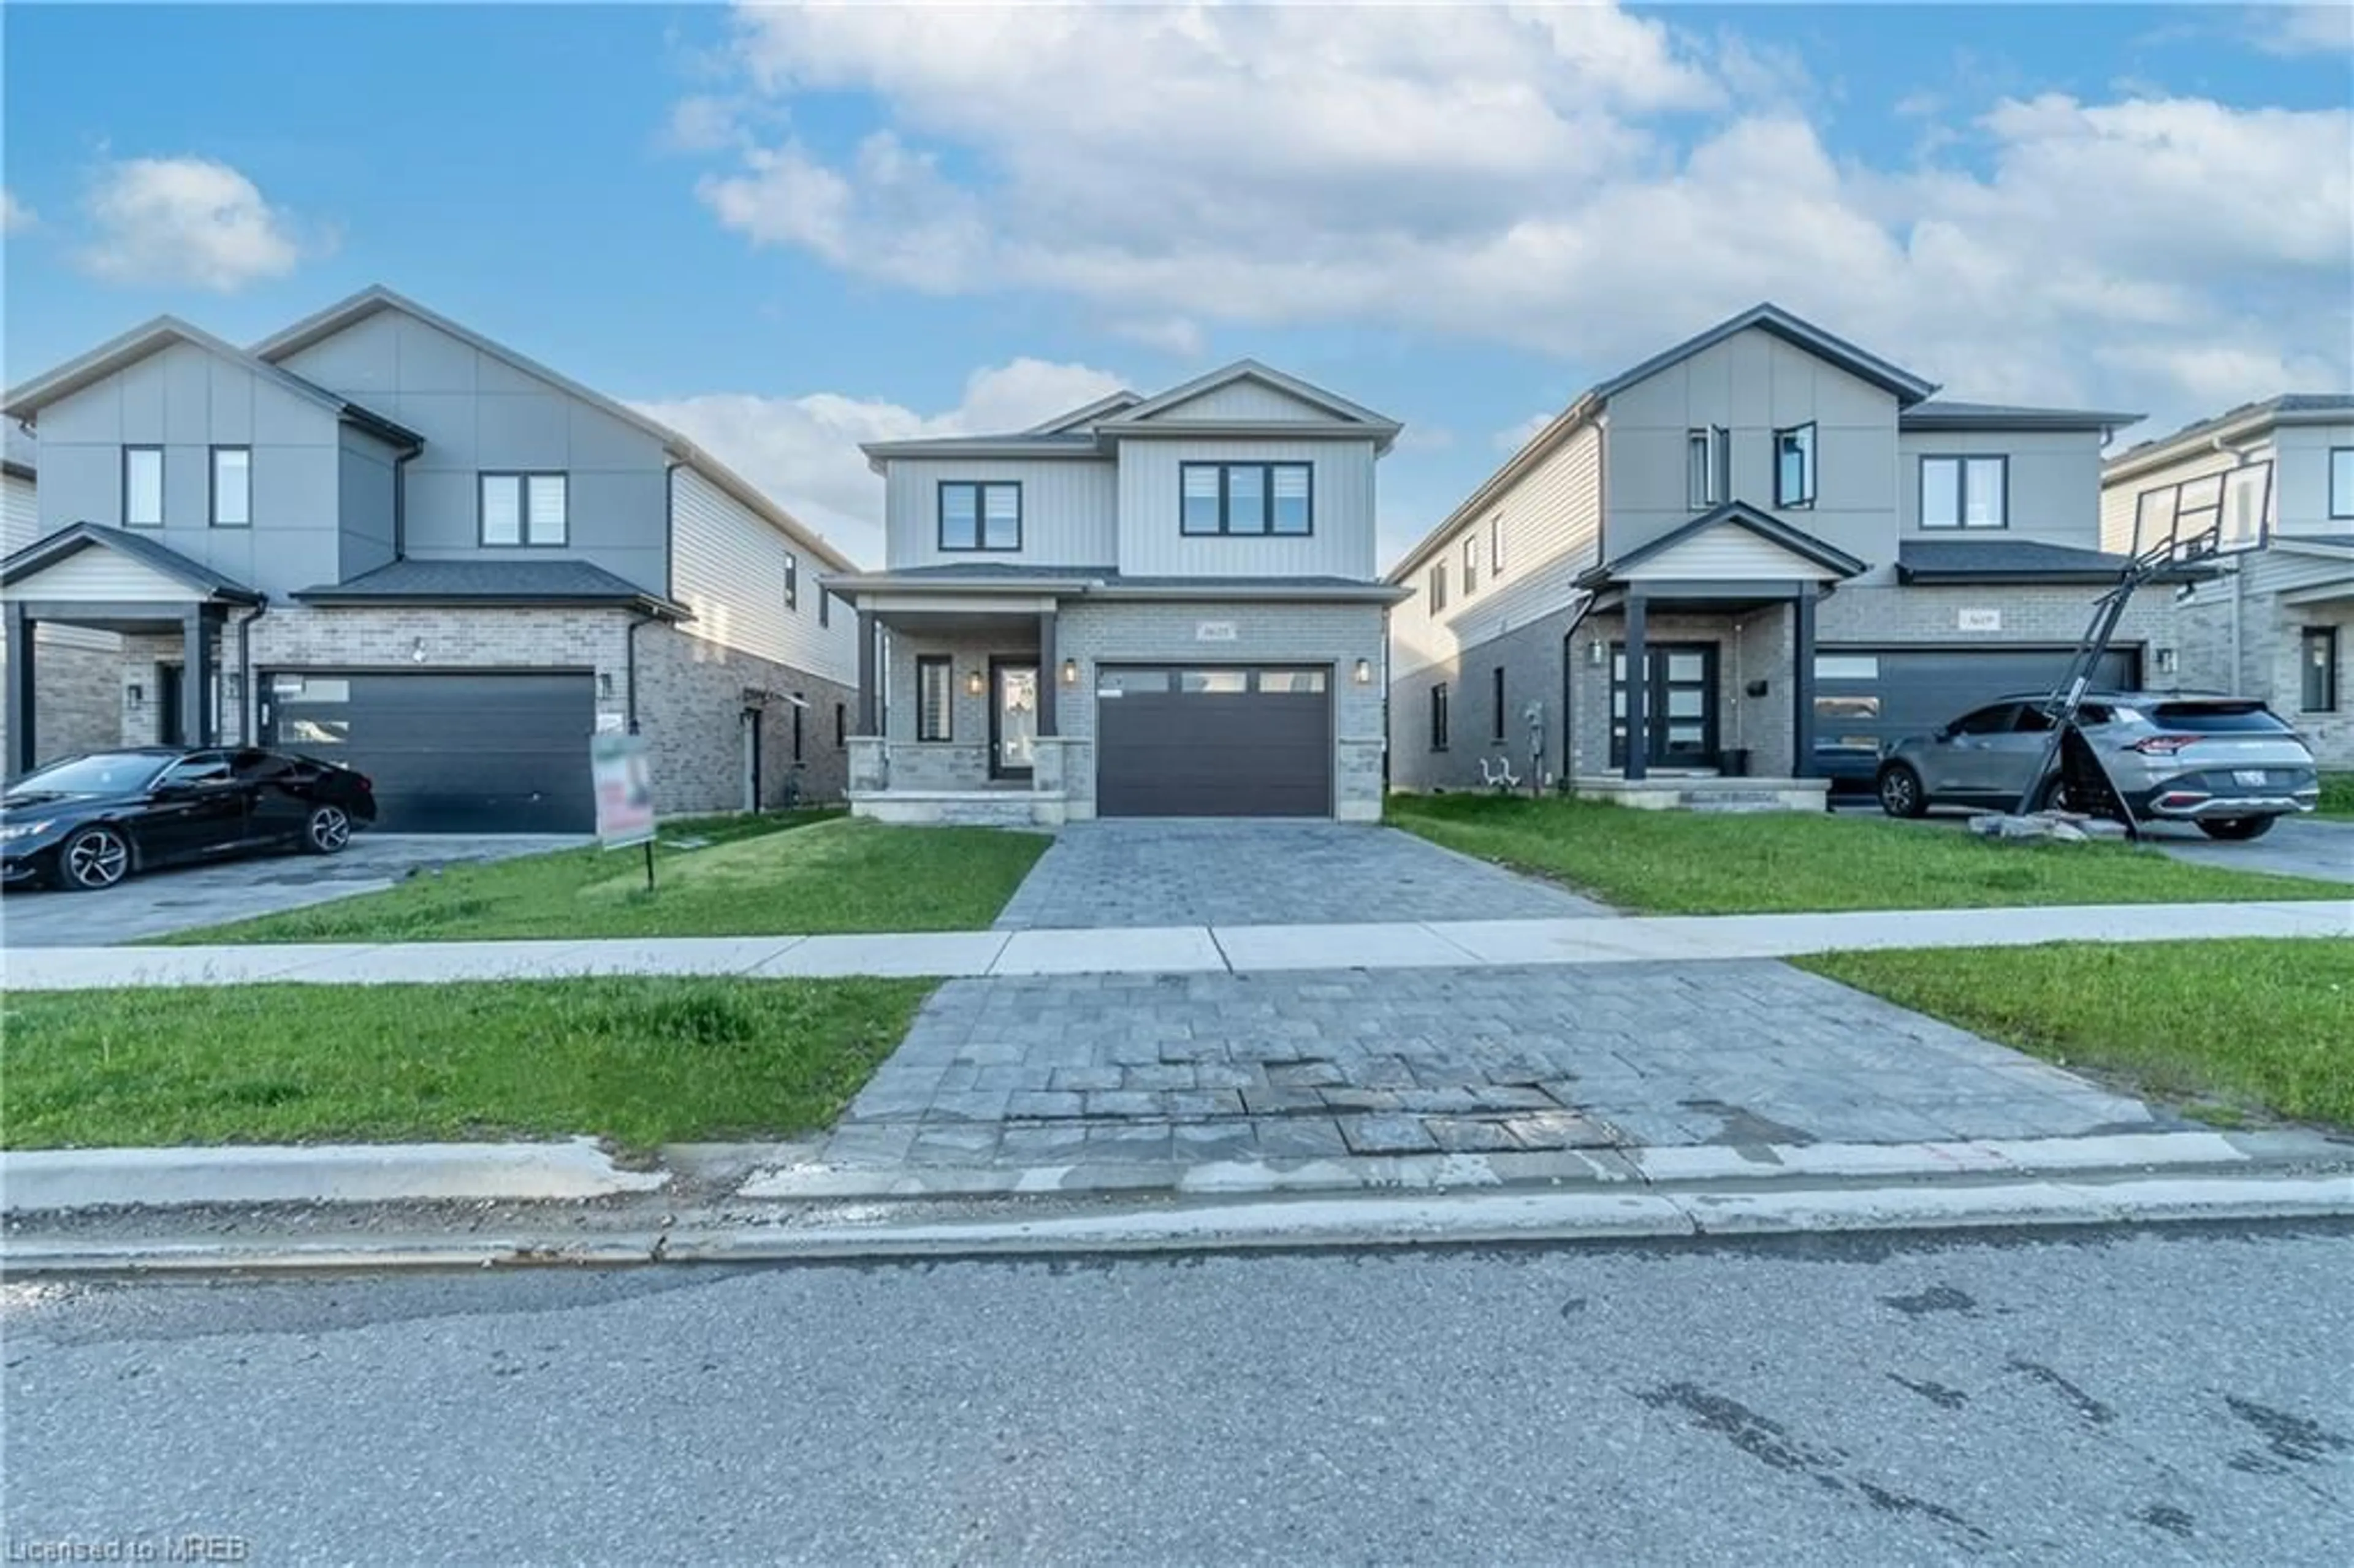 Frontside or backside of a home for 3625 Earlston Cross, London Ontario N6L 0G6